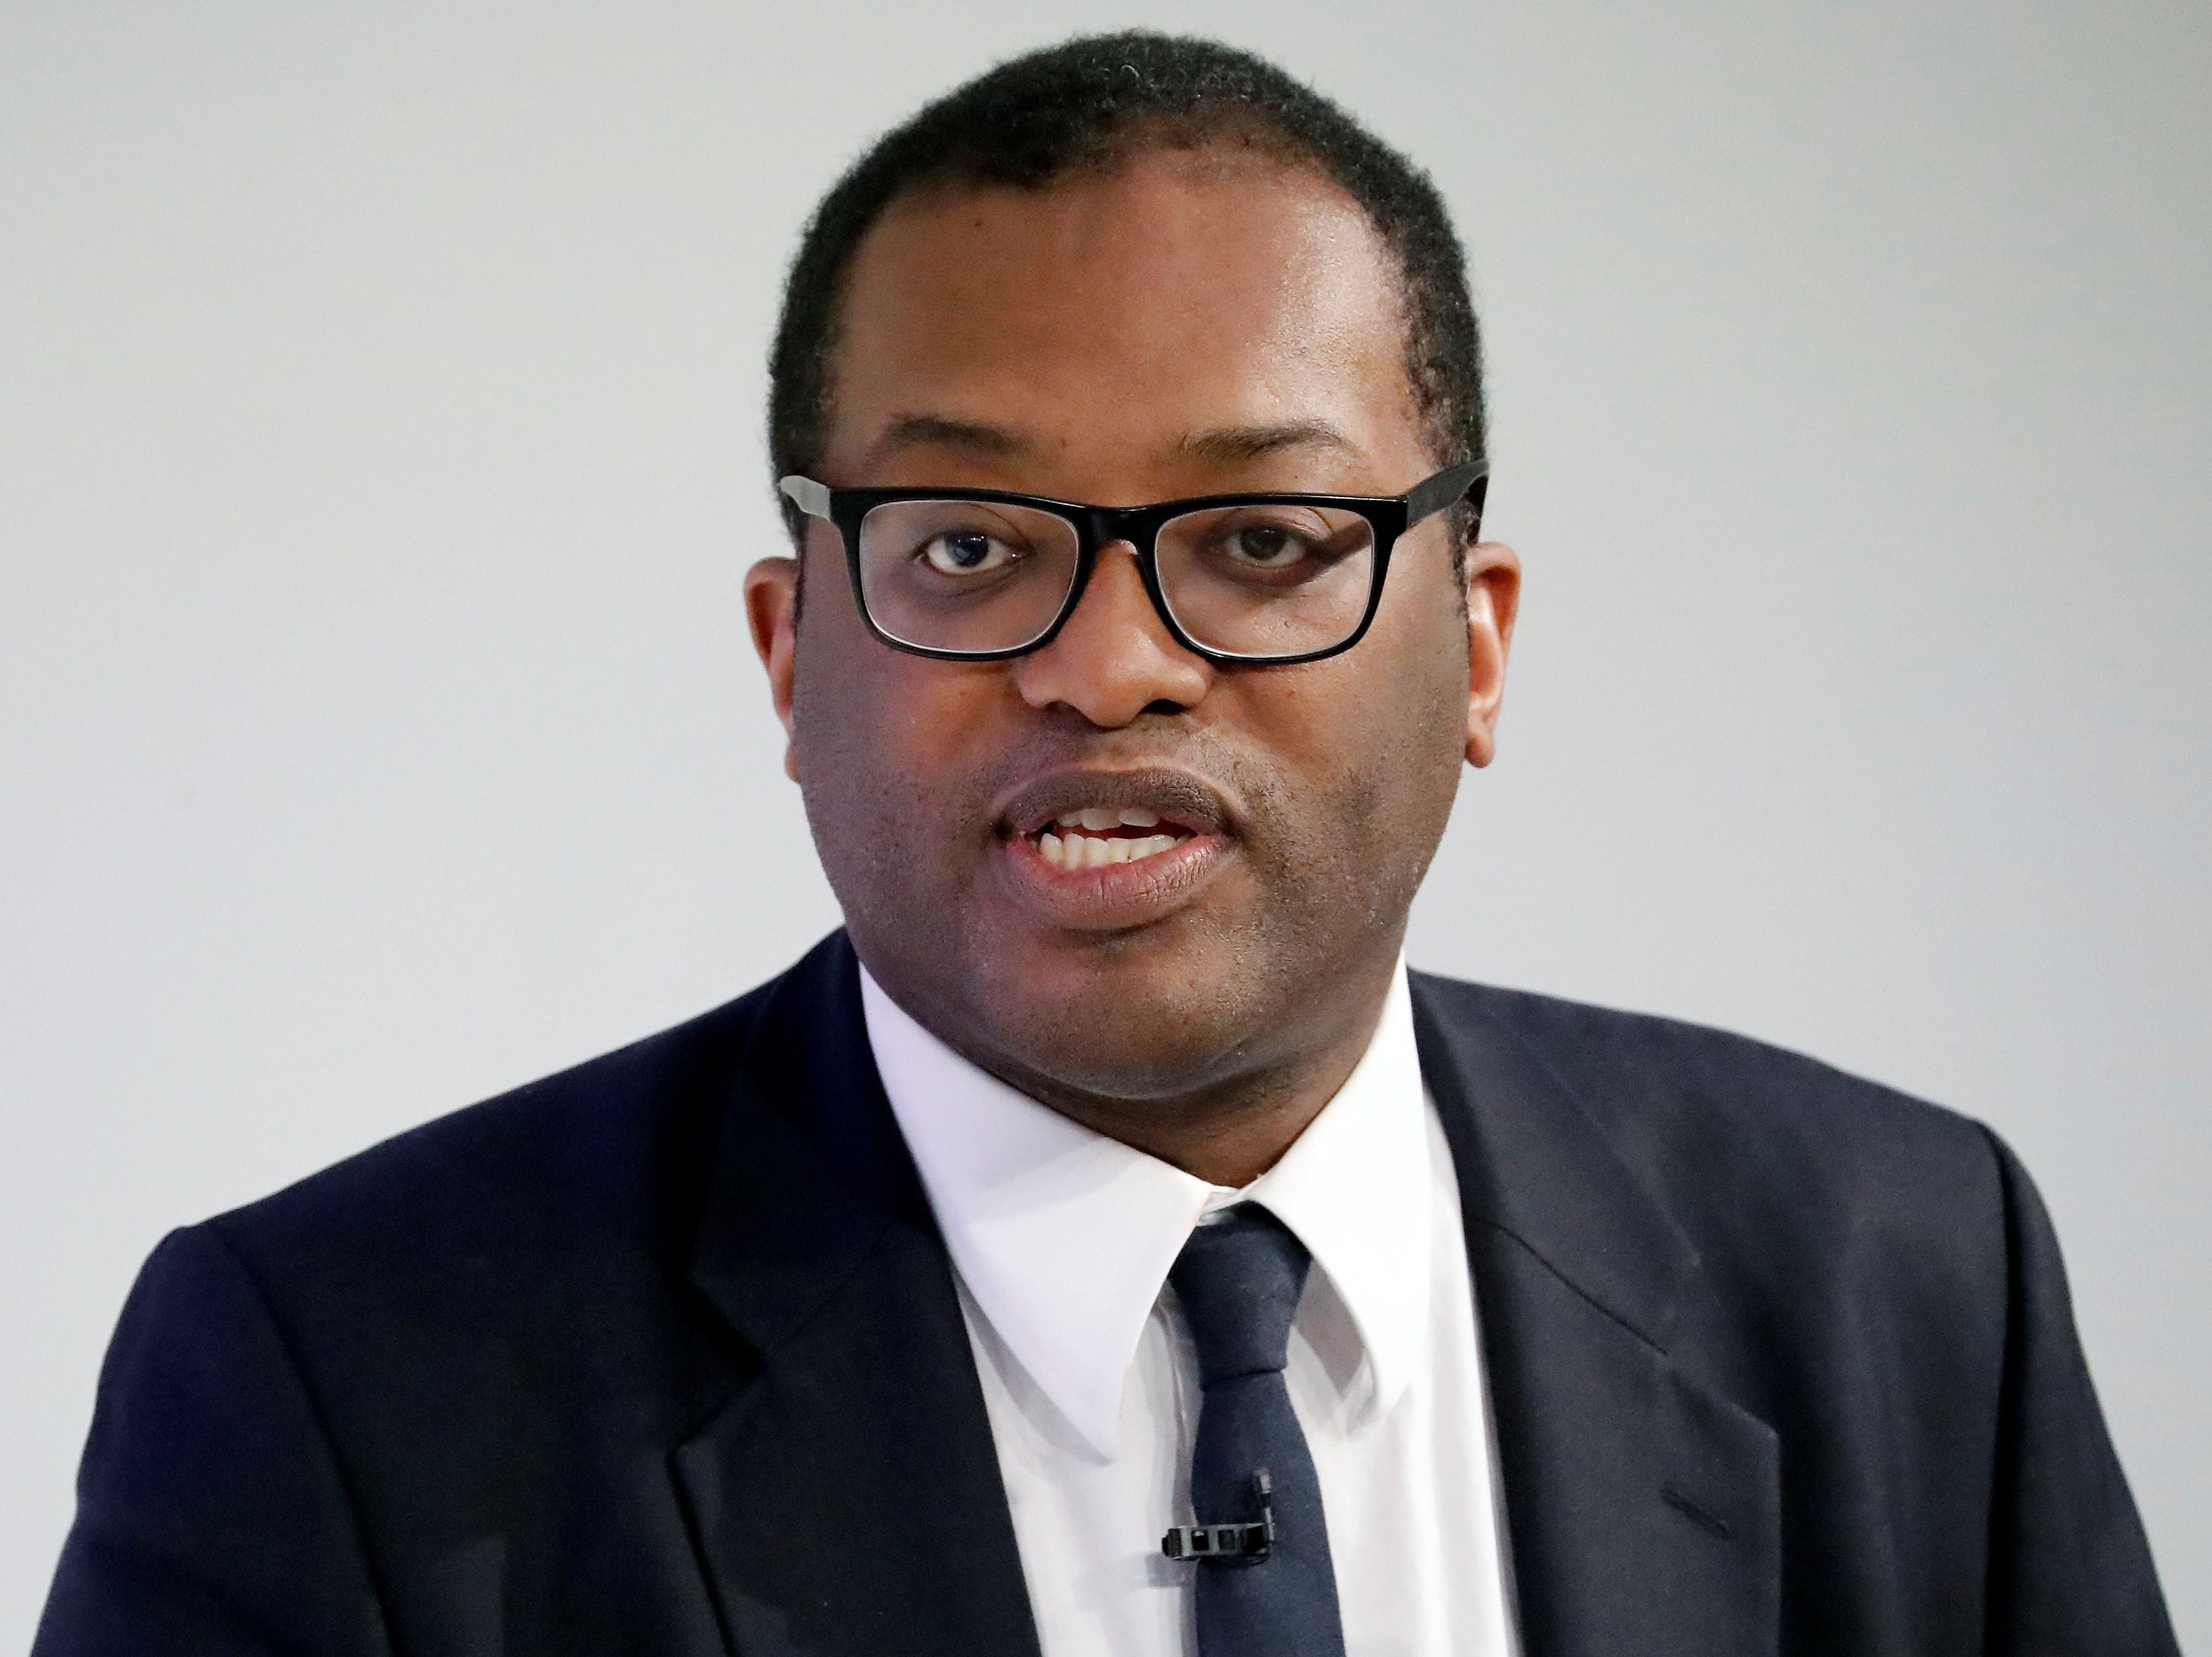 Business secretary Kwasi Kwarteng has said a list of sectors exempt from self-isolation will be published